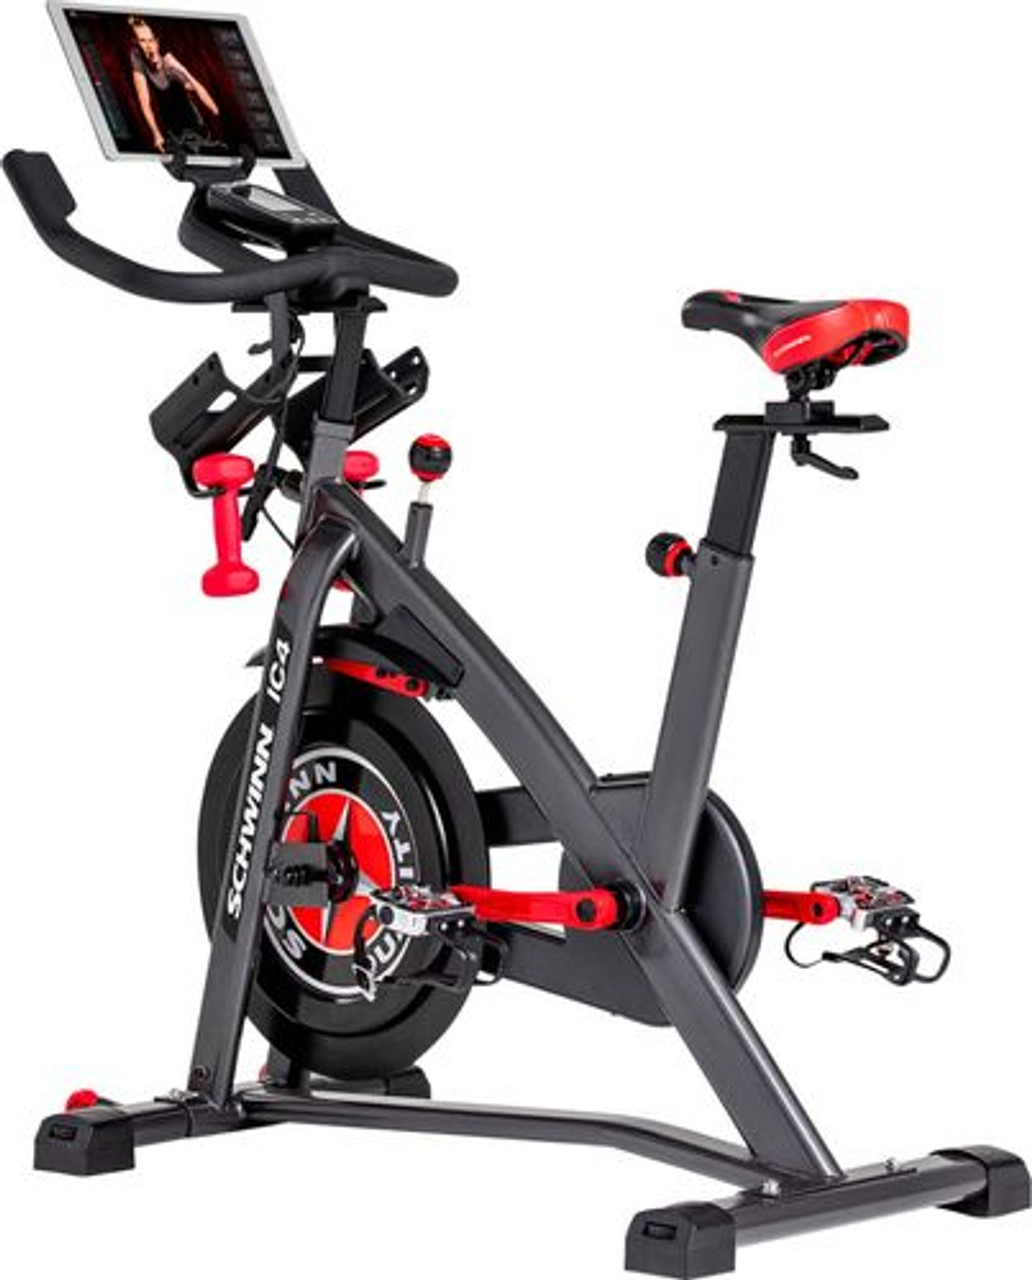 Bowflex - Indoor Cycling Exercise Bike - Gray